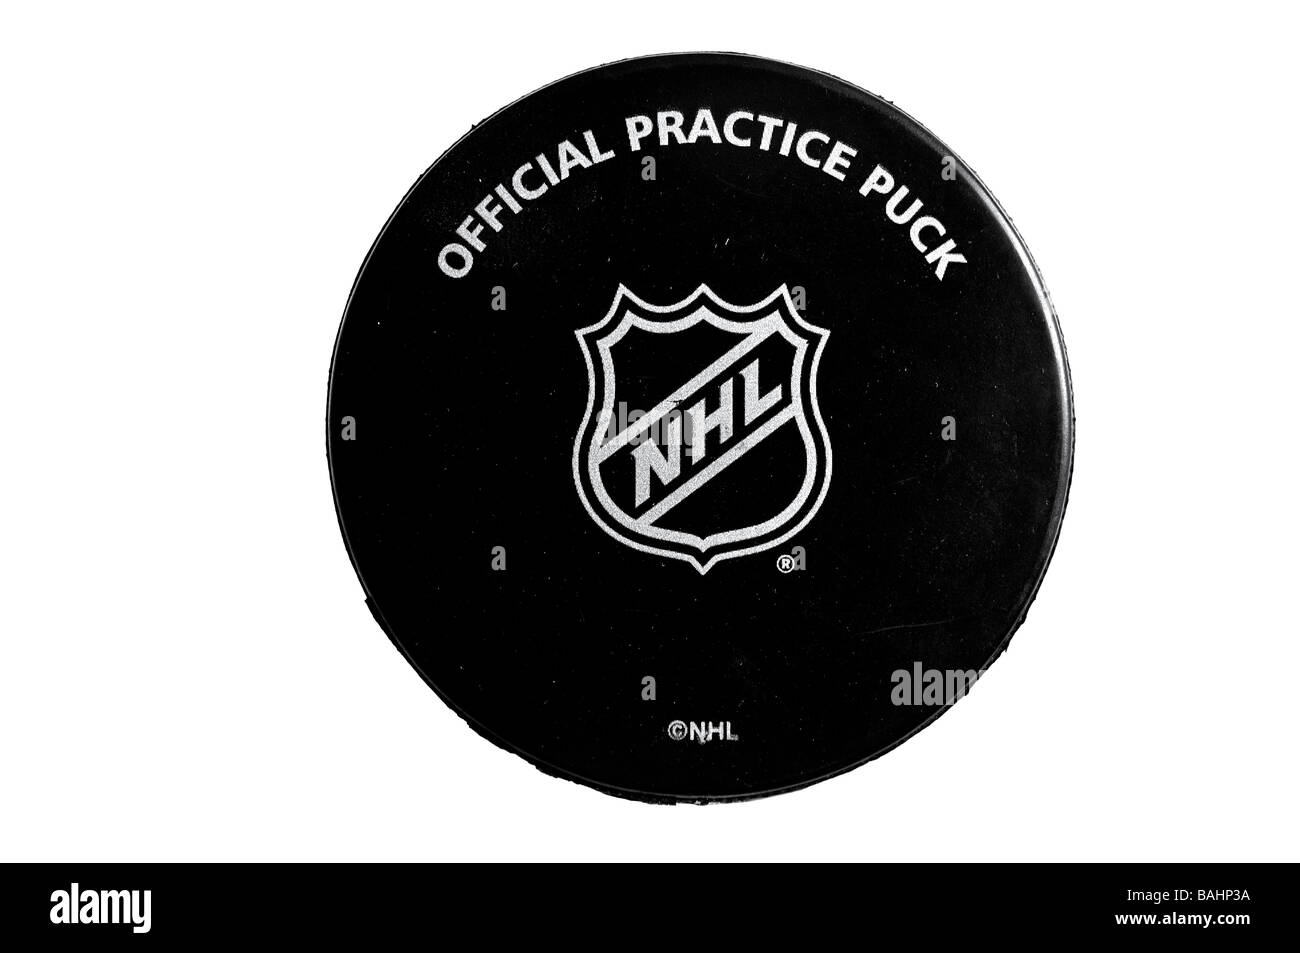 Offizielle NHL Praxis Puck 09239 Stockfoto